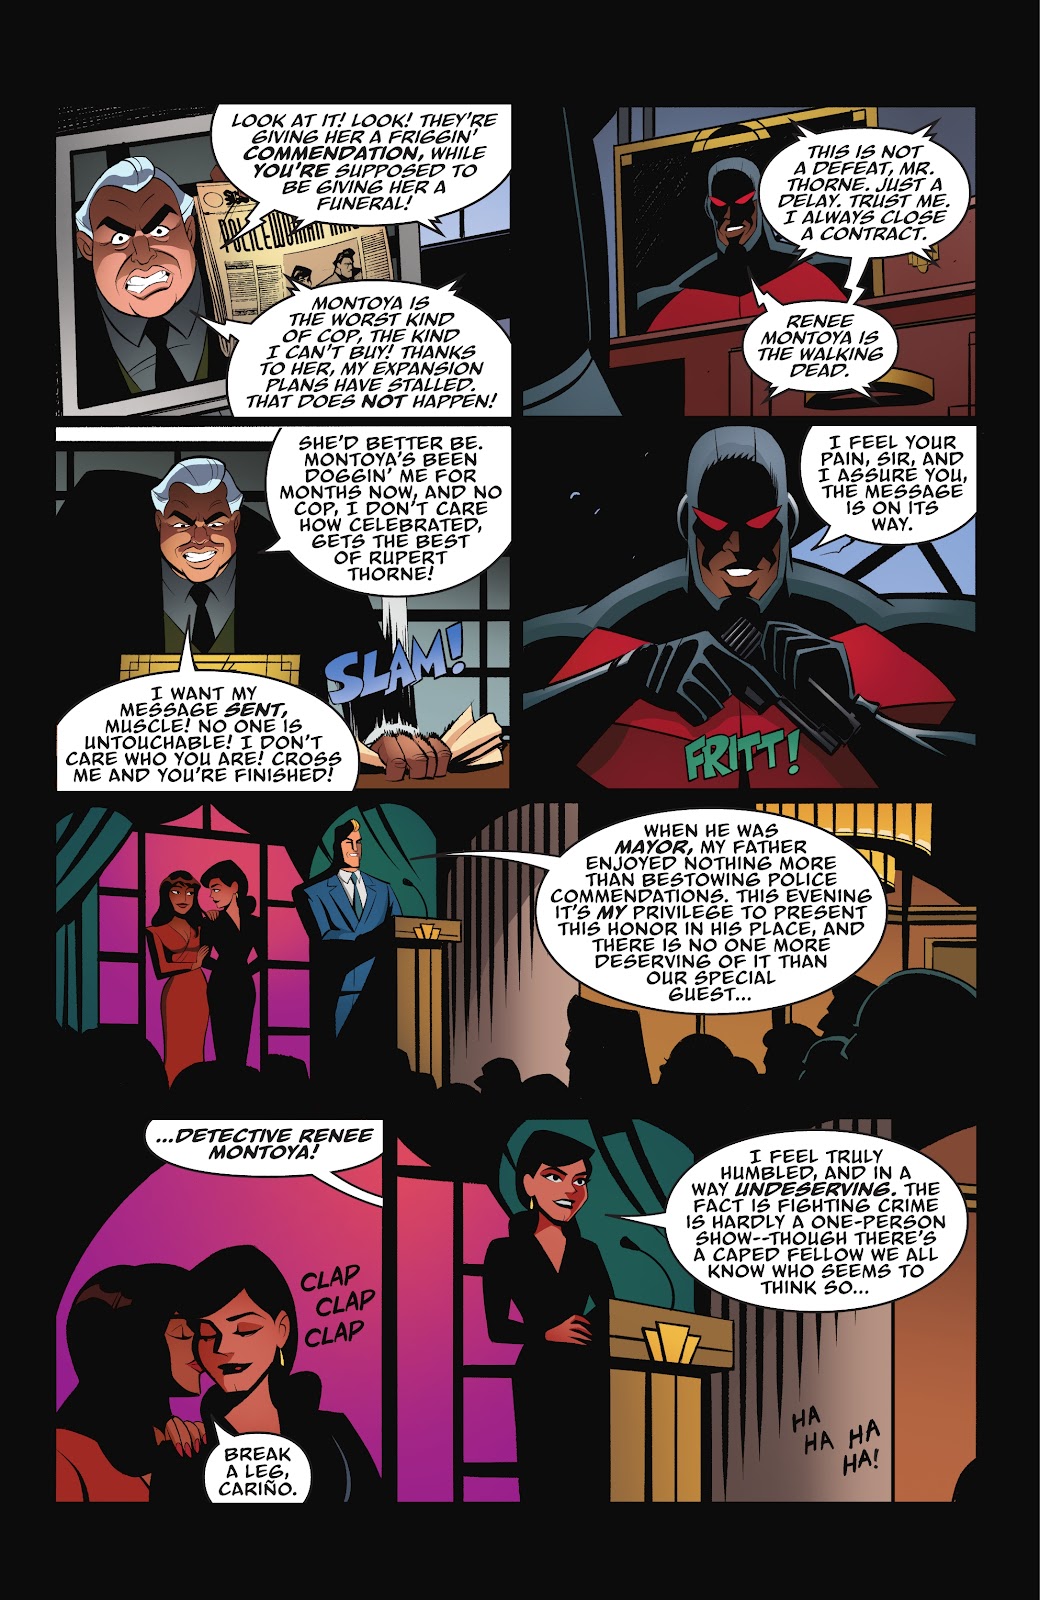 Batman: The Adventures Continue: Season Two issue 4 - Page 11